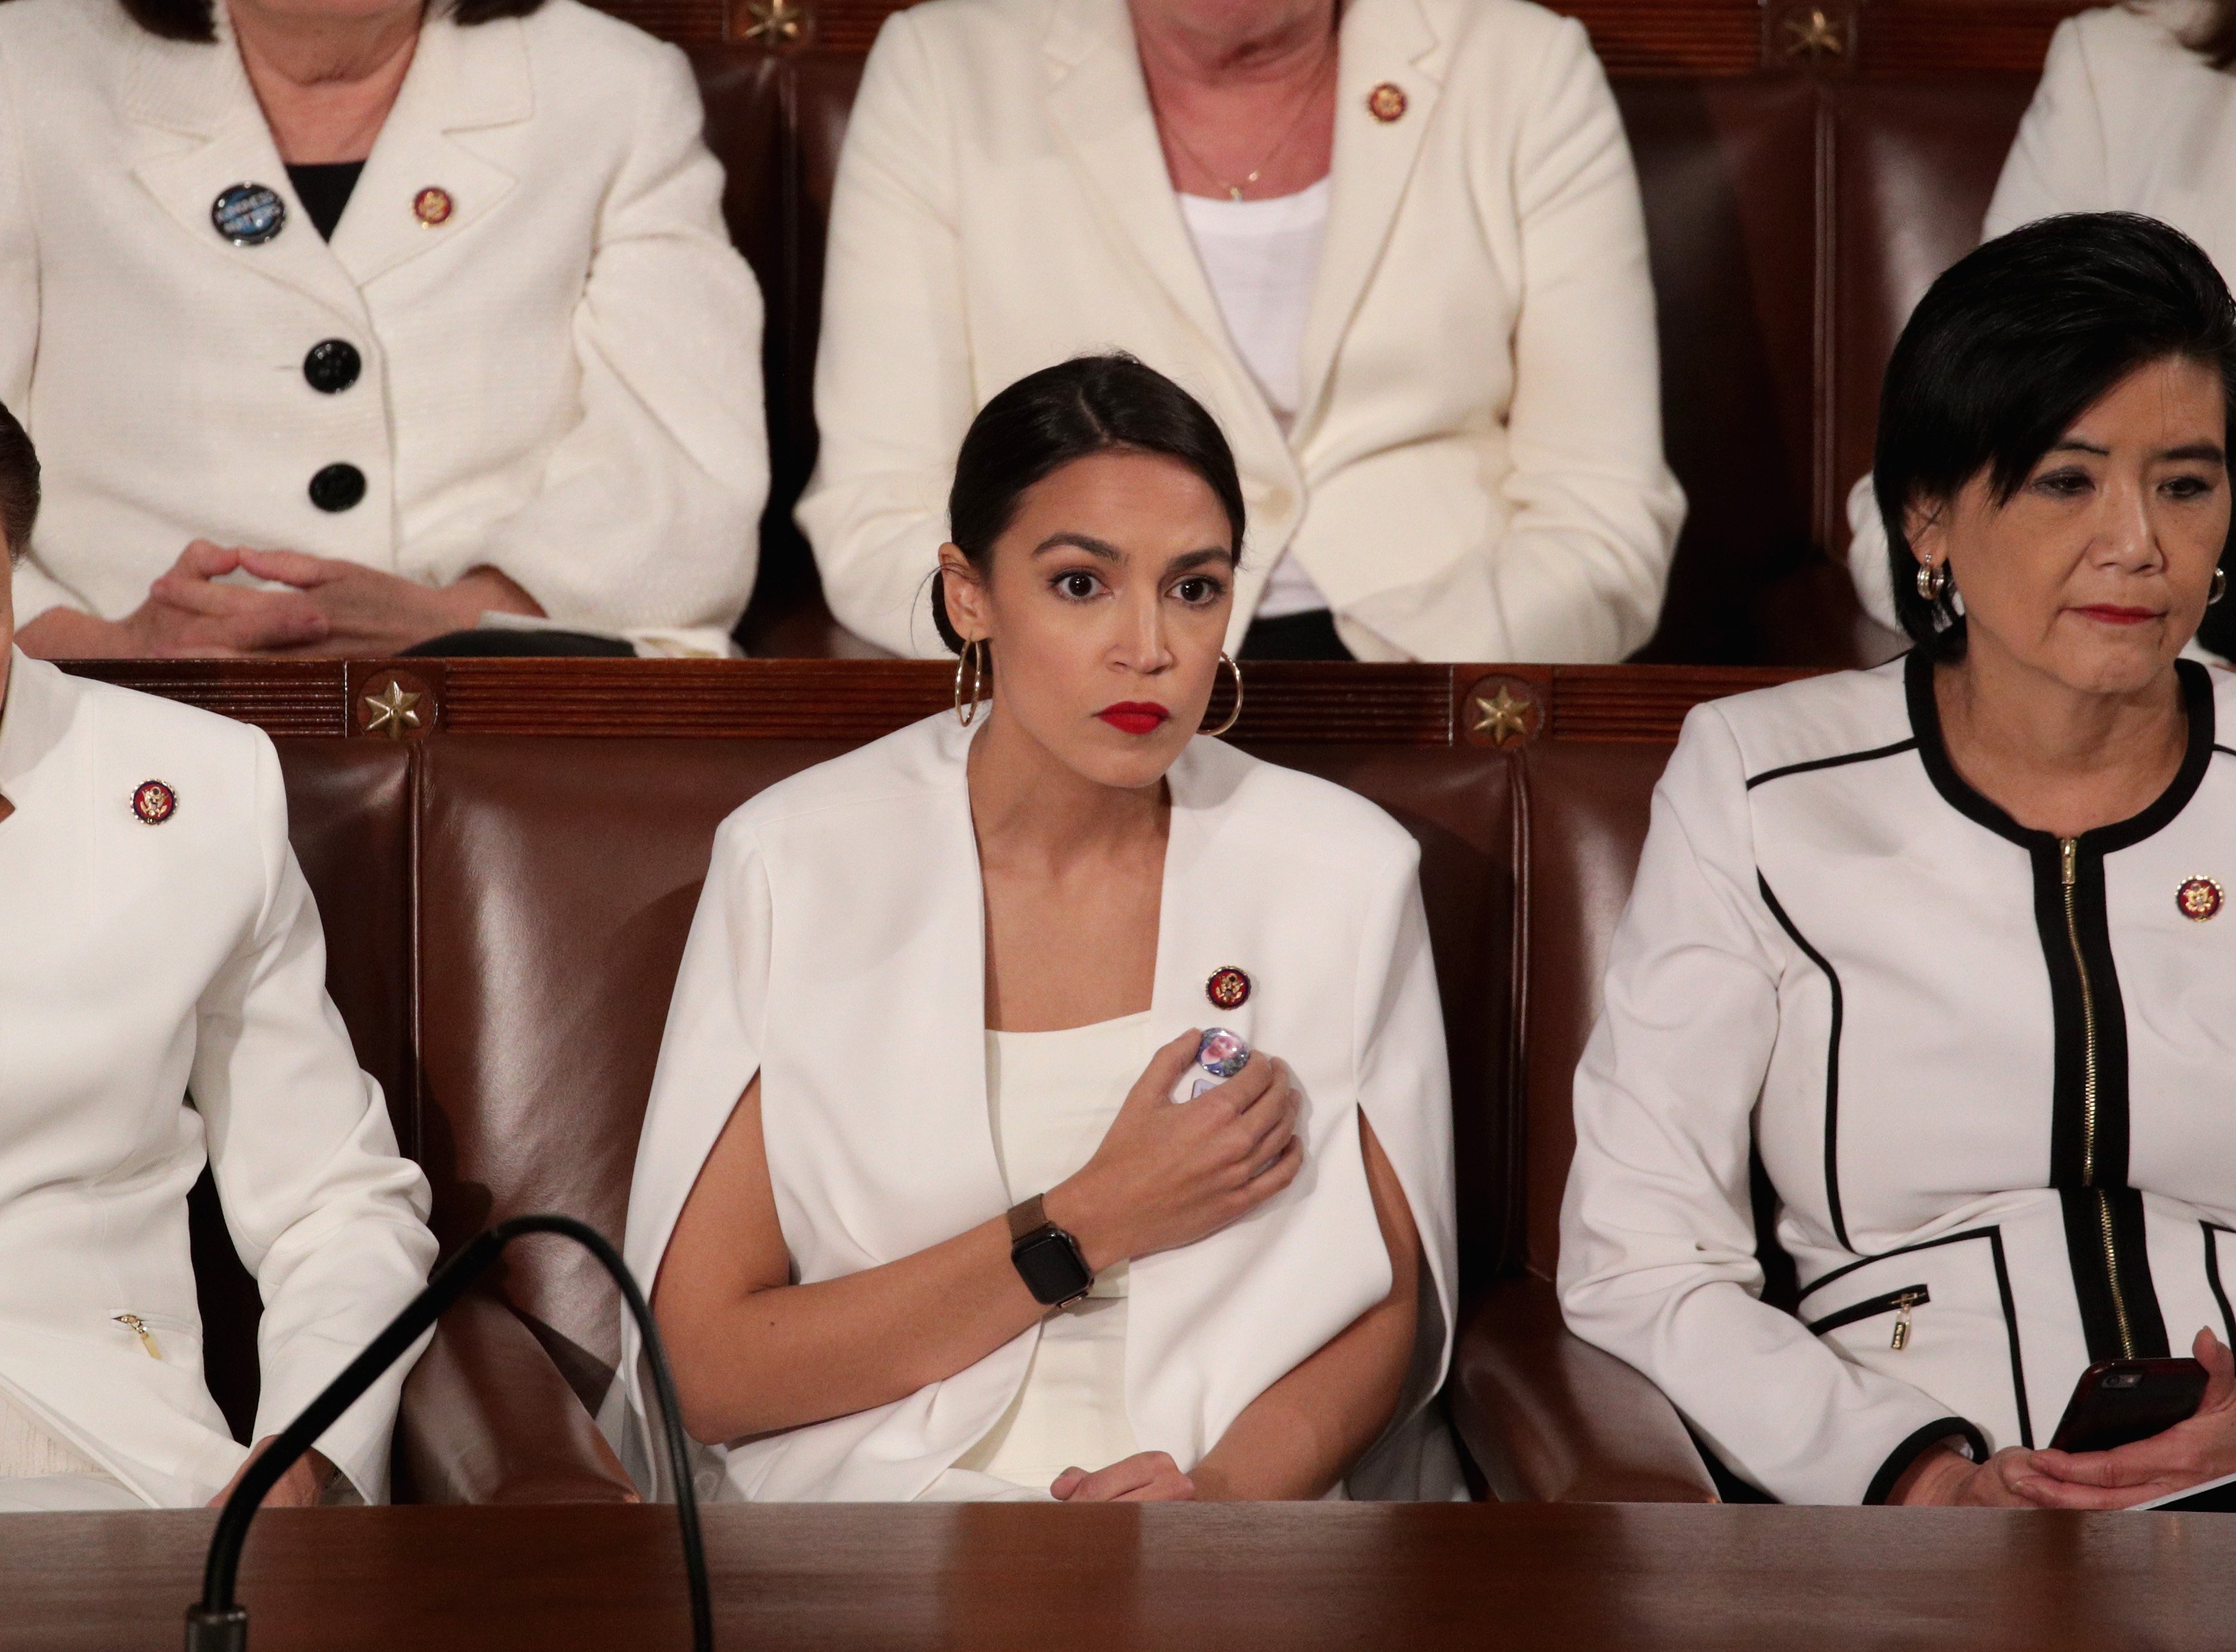 Alexandria Ocasio-Cortez at the State of the Union Speech in February 2019 | Photo: Getty Images